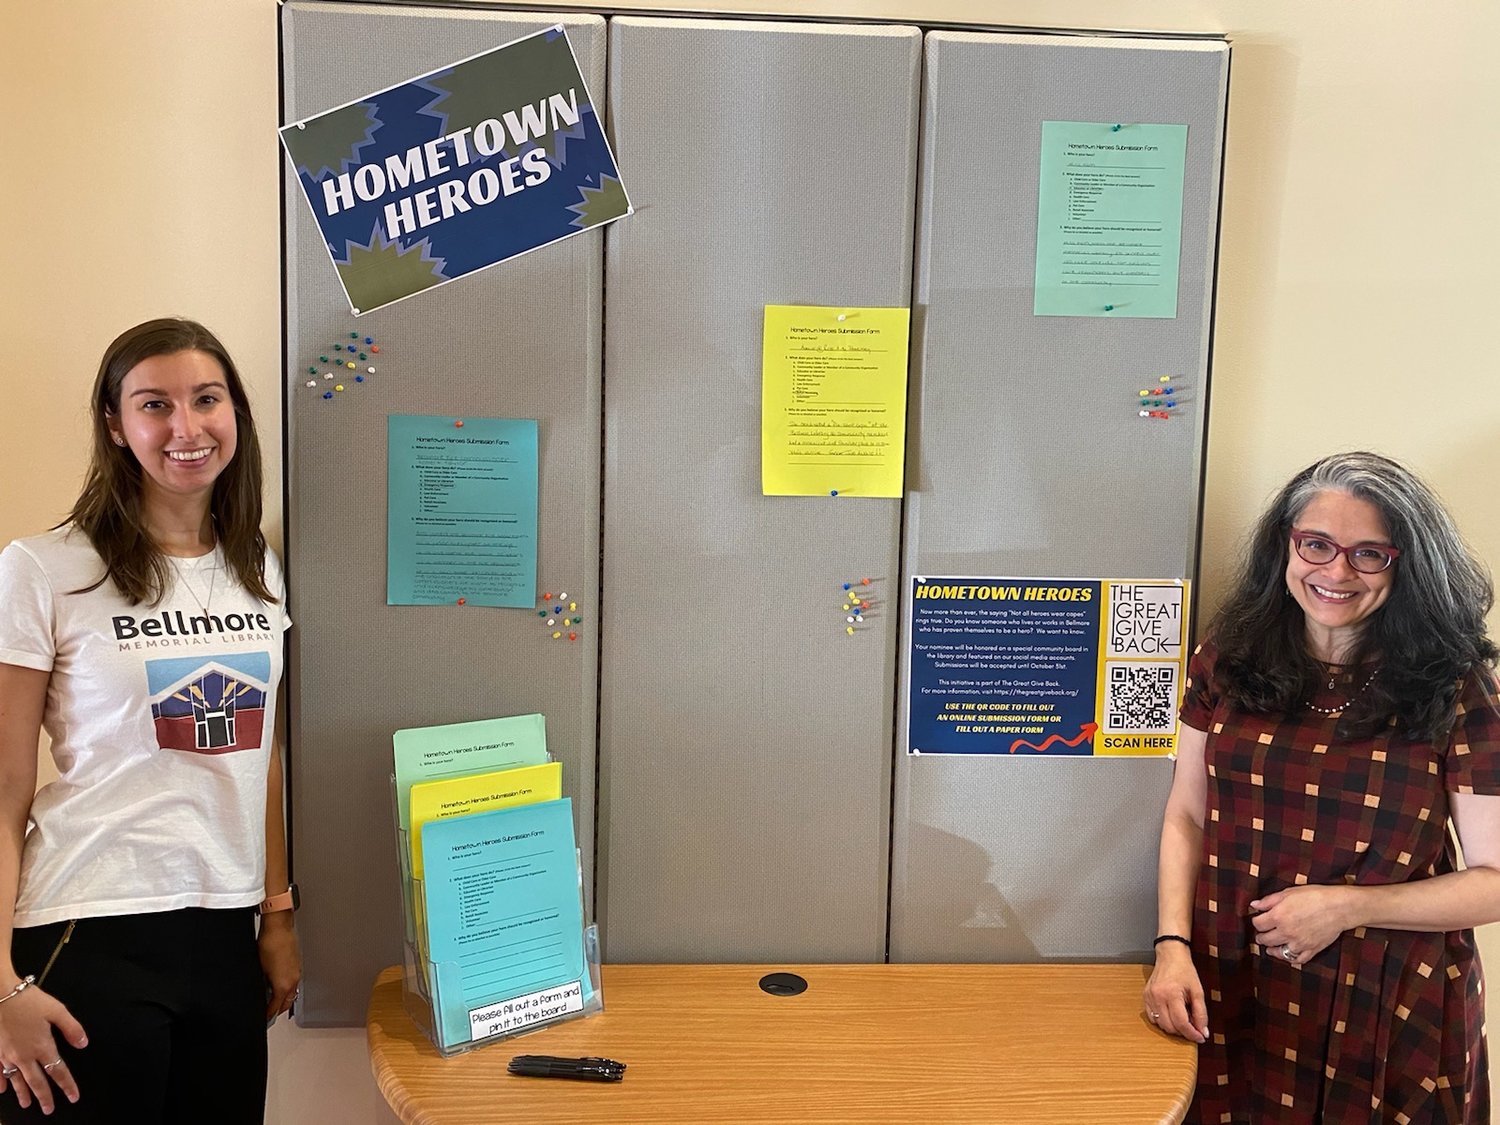 By the end of October, the Hometown Heroes board in the Bellmore Memorial Library will be filled with stories of individuals who serve the community. Librarians Pam Pagones, near right, and Martha DiVittorio helped organize the initiative as part of the Great Give Back.